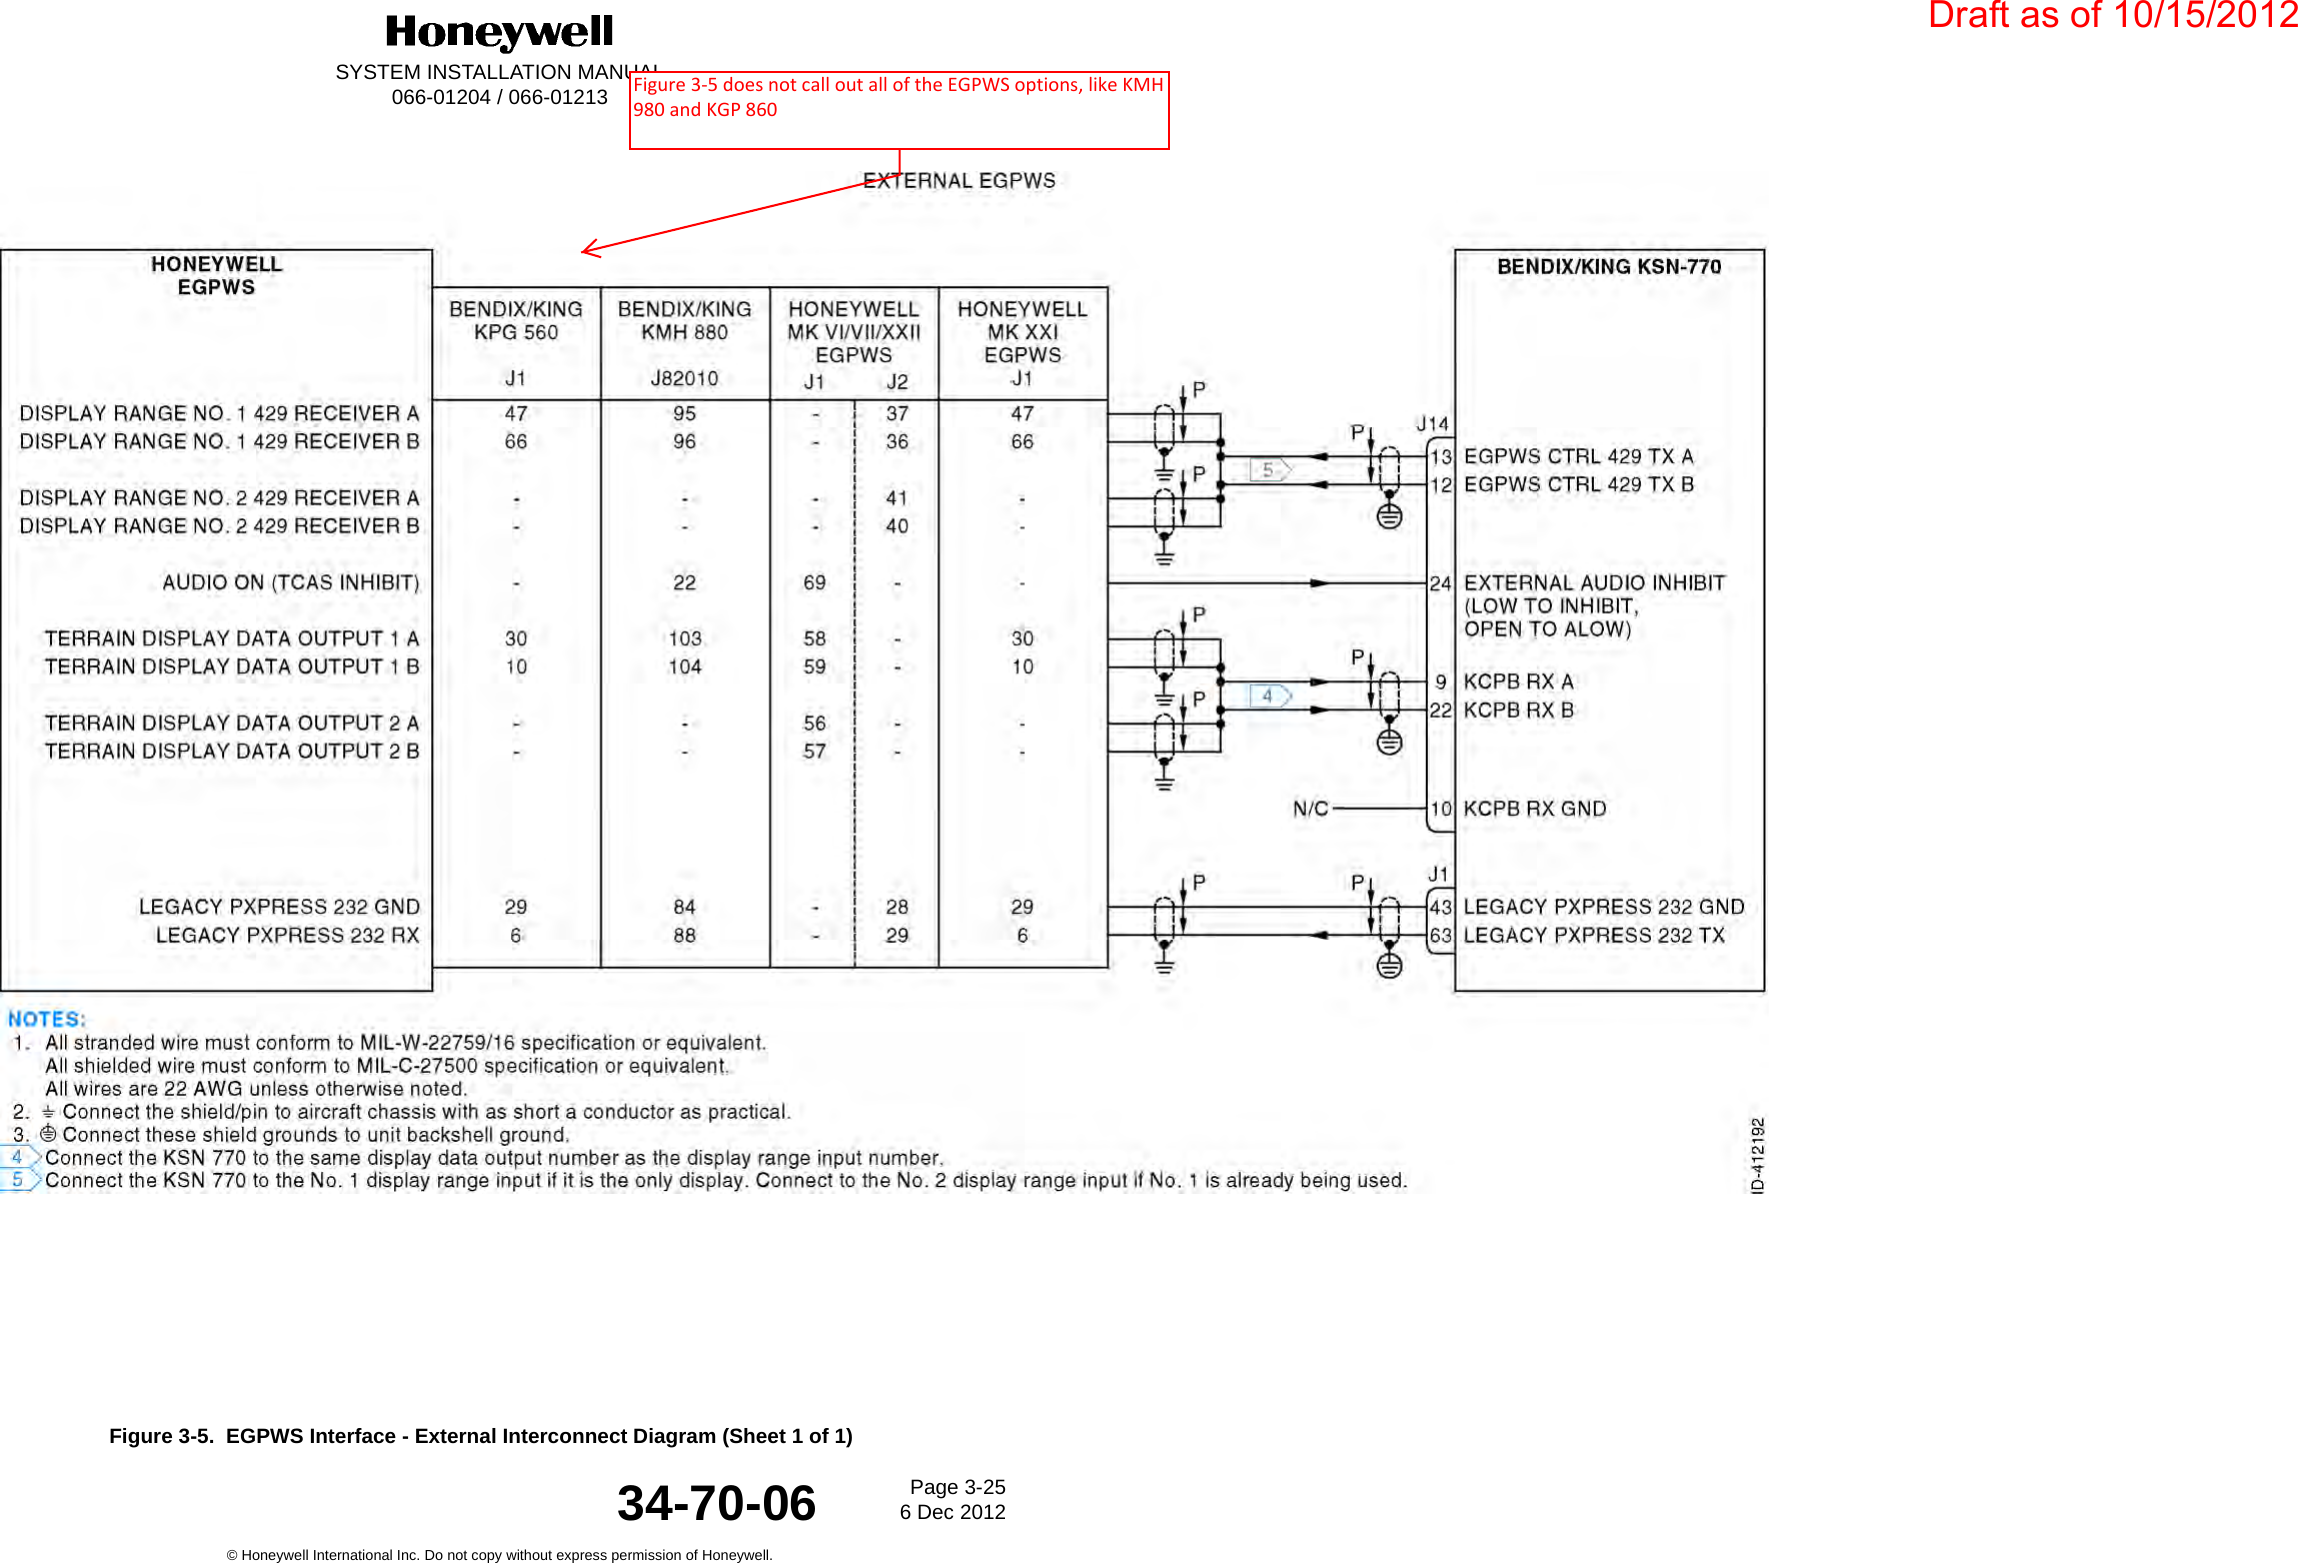 DraftSYSTEM INSTALLATION MANUAL066-01204 / 066-01213Page 3-256 Dec 2012© Honeywell International Inc. Do not copy without express permission of Honeywell.34-70-06Figure 3-5.  EGPWS Interface - External Interconnect Diagram (Sheet 1 of 1)Draft as of 10/15/2012Figure 3-5 does not call out all of the EGPWS options, like KMH 980 and KGP 860 